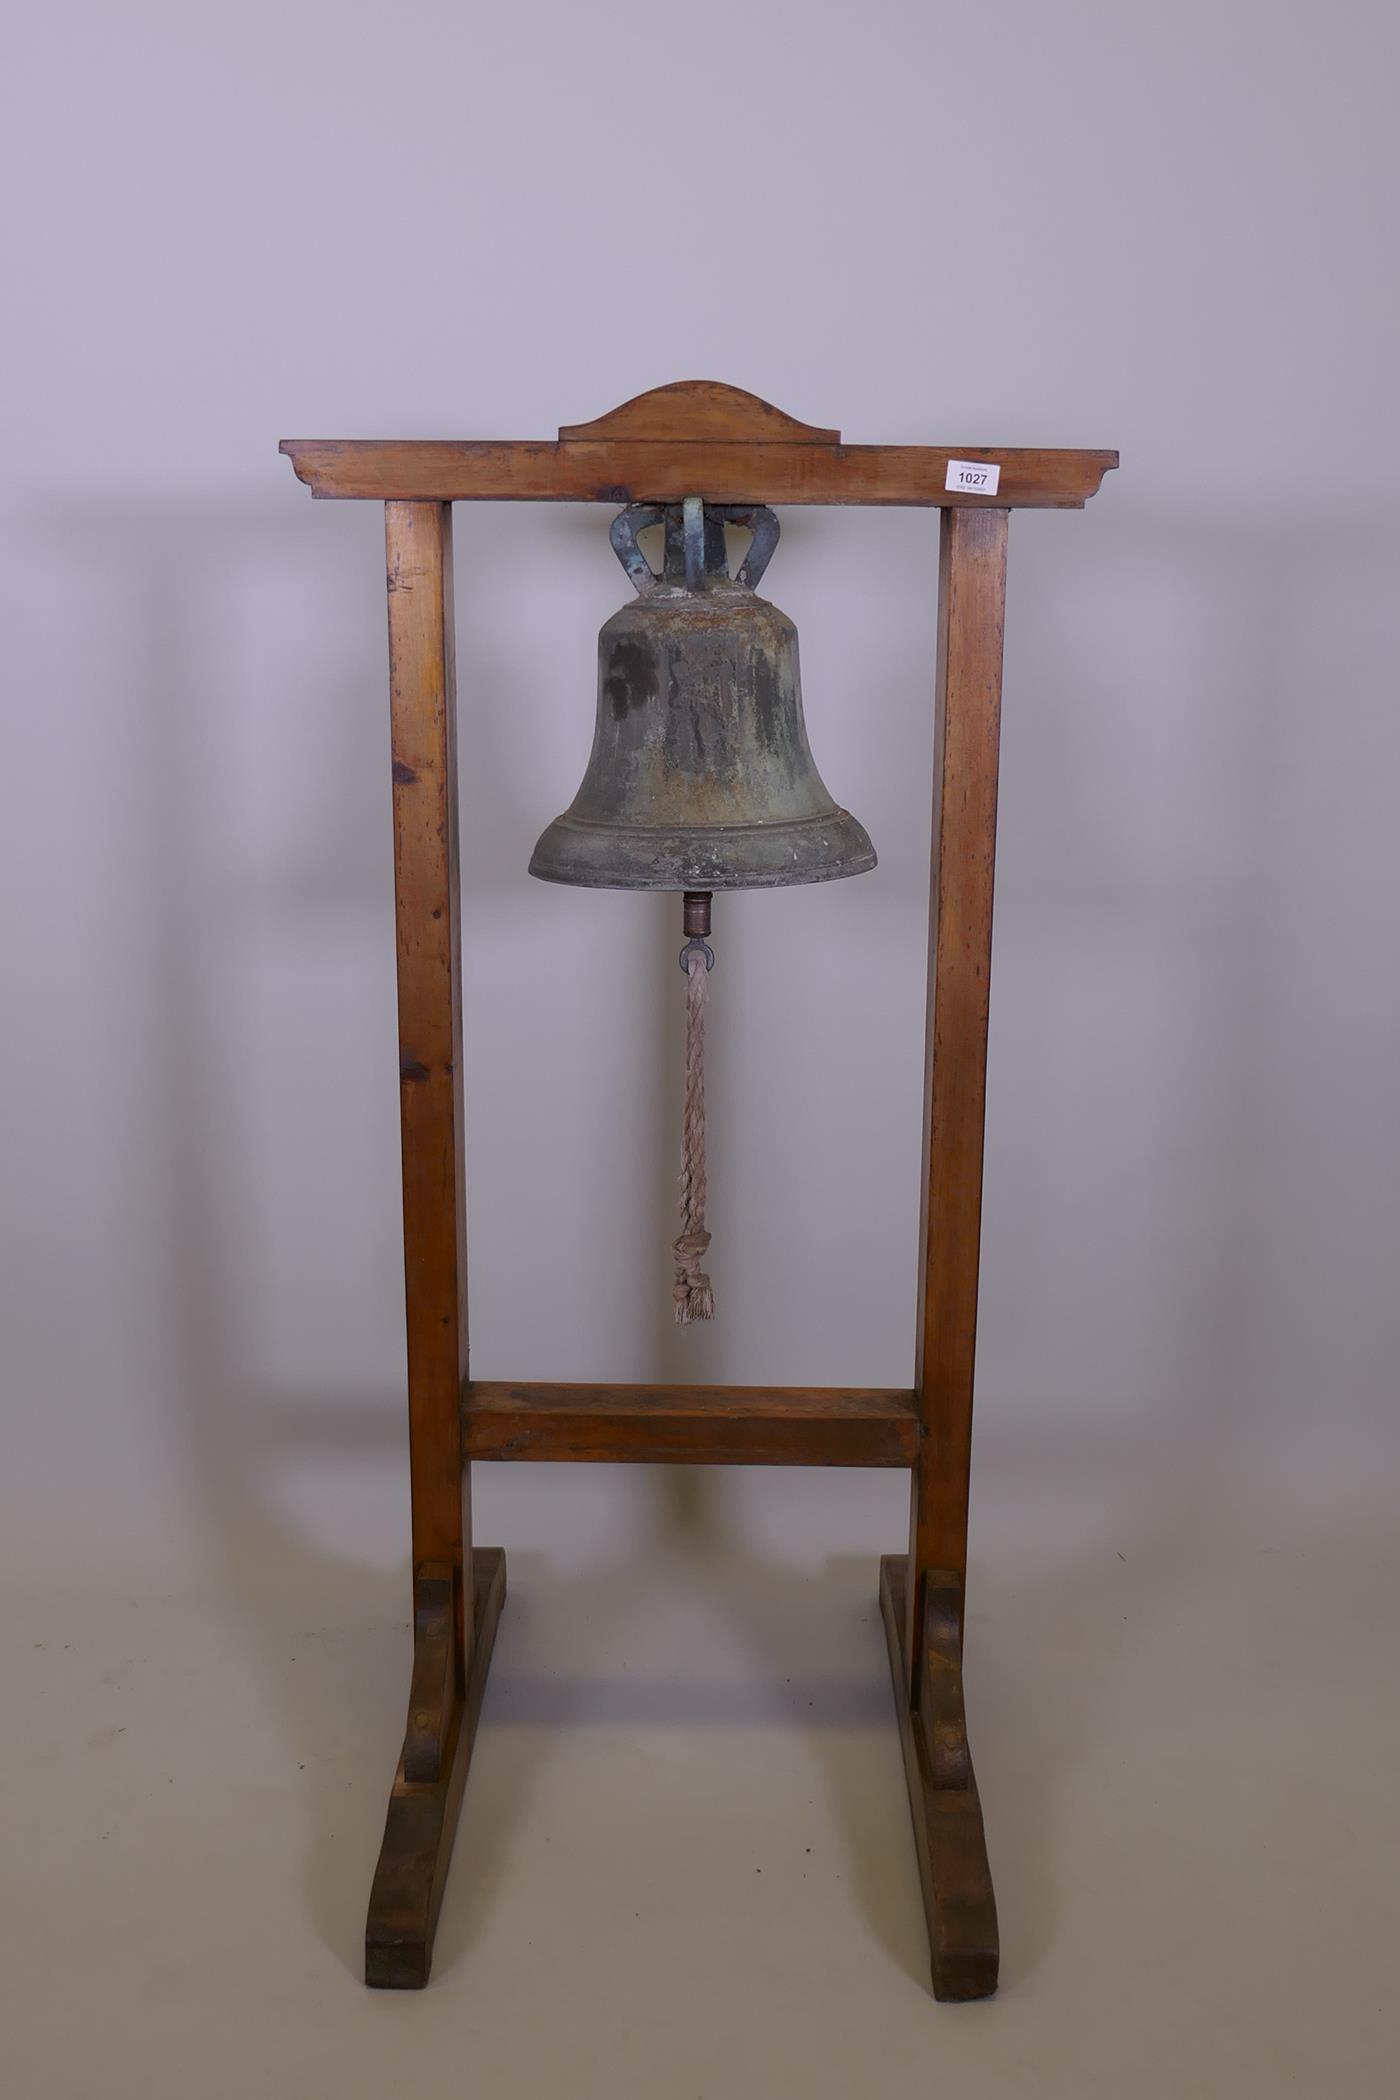 Antique bronze bell, mounted in a pine frame, 45" x 26" x 25"